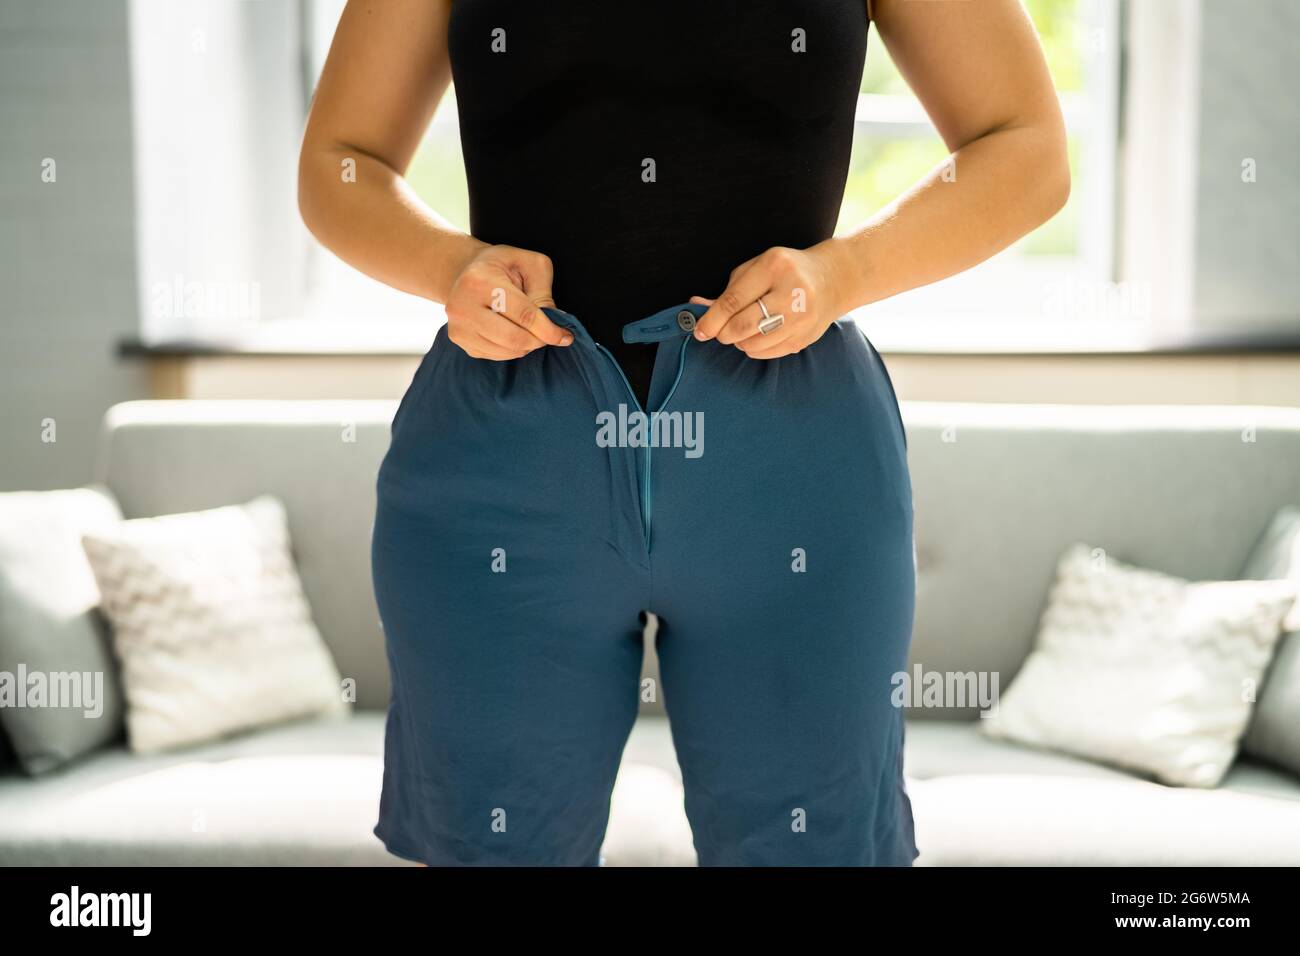 Woman With Weight Gain. Fat Belly Button Stock Photo